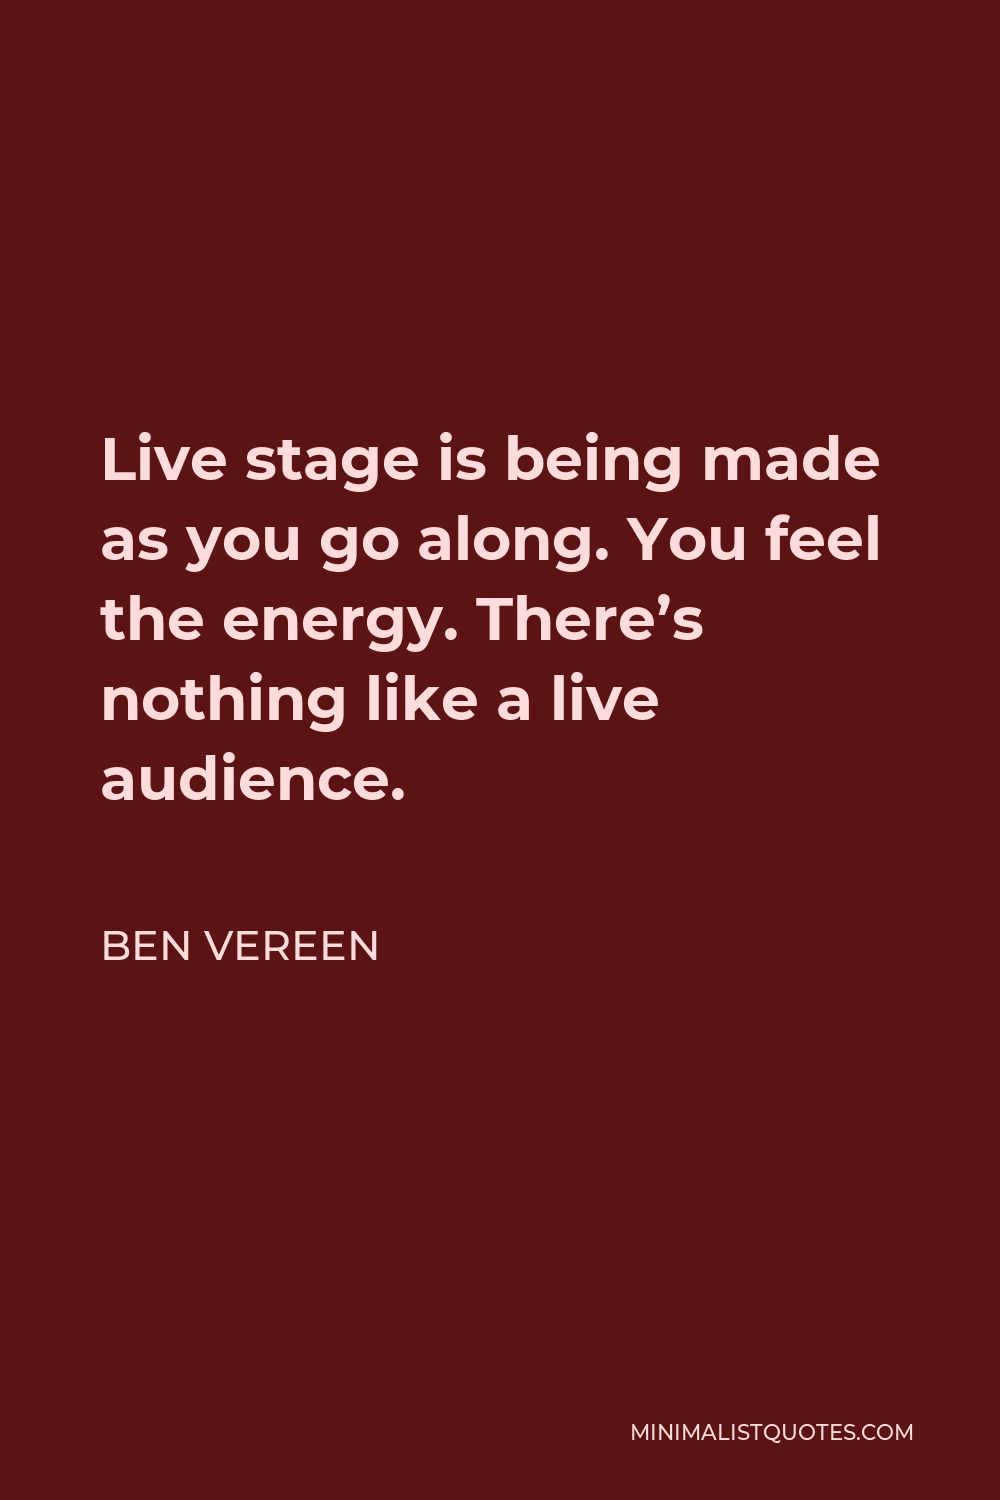 Ben Vereen Quote - Live stage is being made as you go along. You feel the energy. There’s nothing like a live audience.